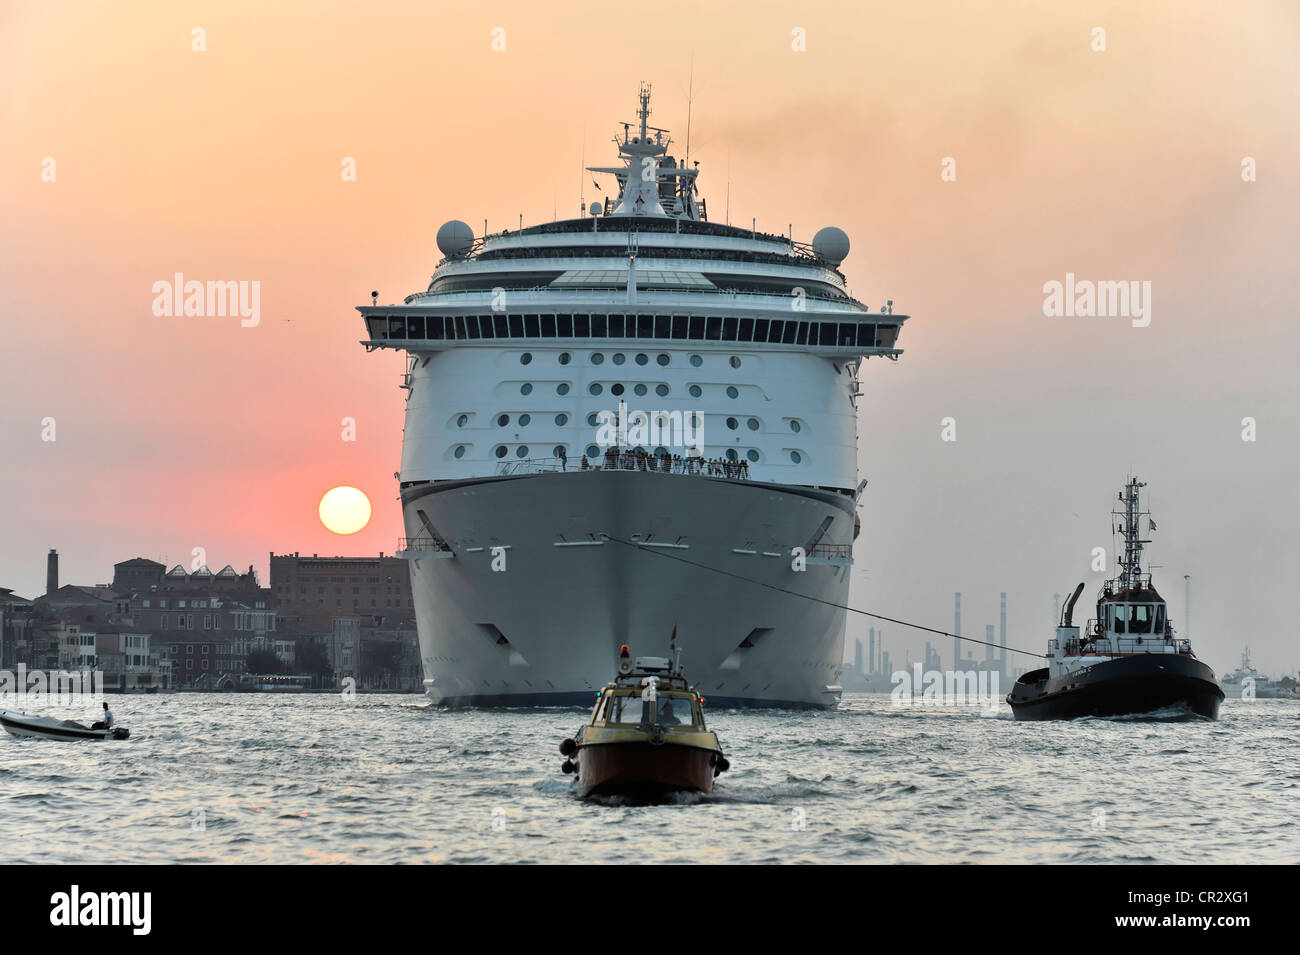 Voyager of the Seas, cruise ship, built in 1999, 311m, 3114 passengers, departing, Venice, Veneto, Italy, Europe Stock Photo